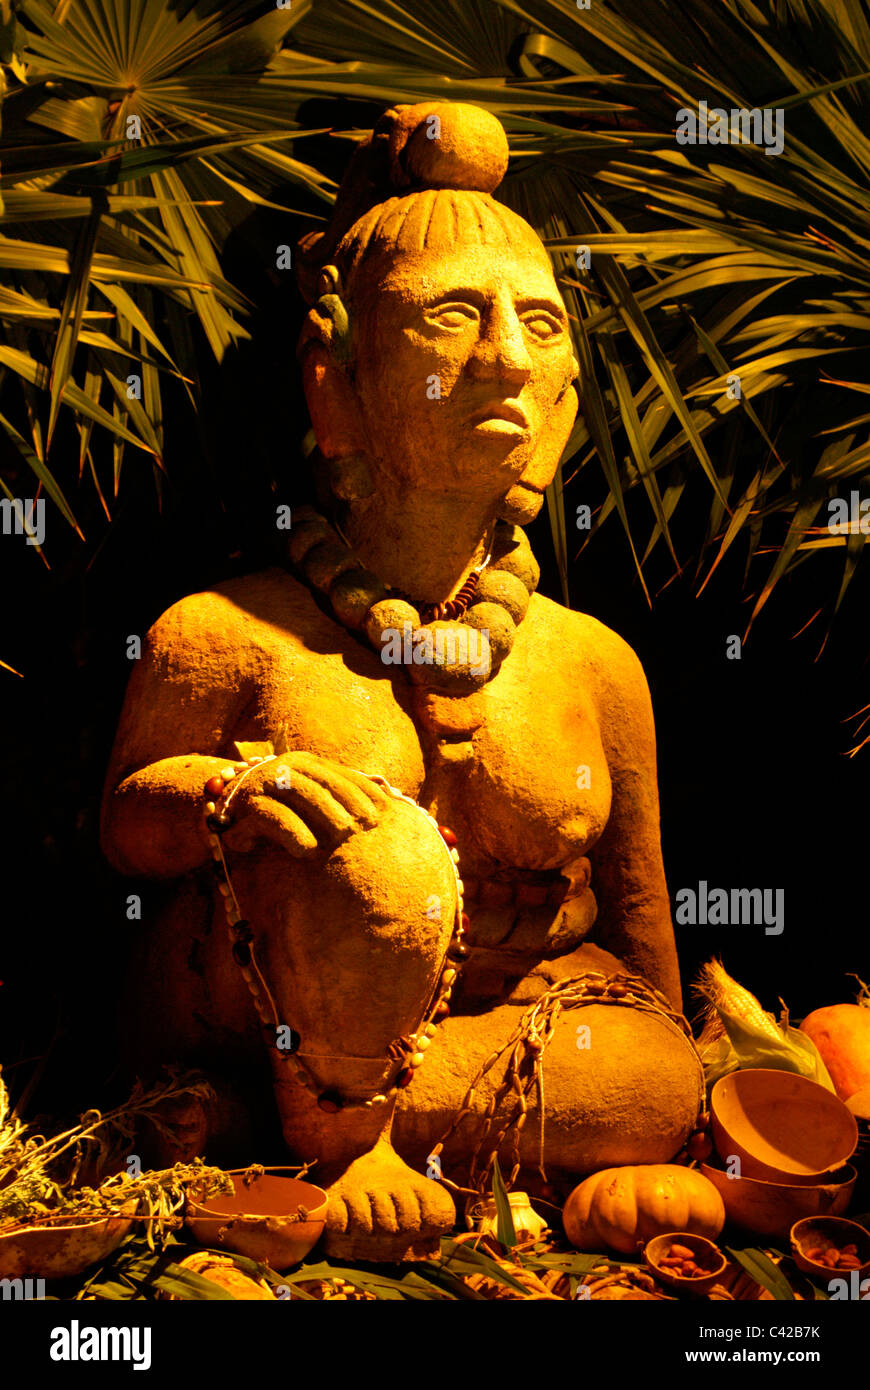 Statue of Ixchel, a Mayan fertility and moon goddess, surrounded by offerings, Xcaret park, Riviera Maya, Quintana Roo, Mexico Stock Photo